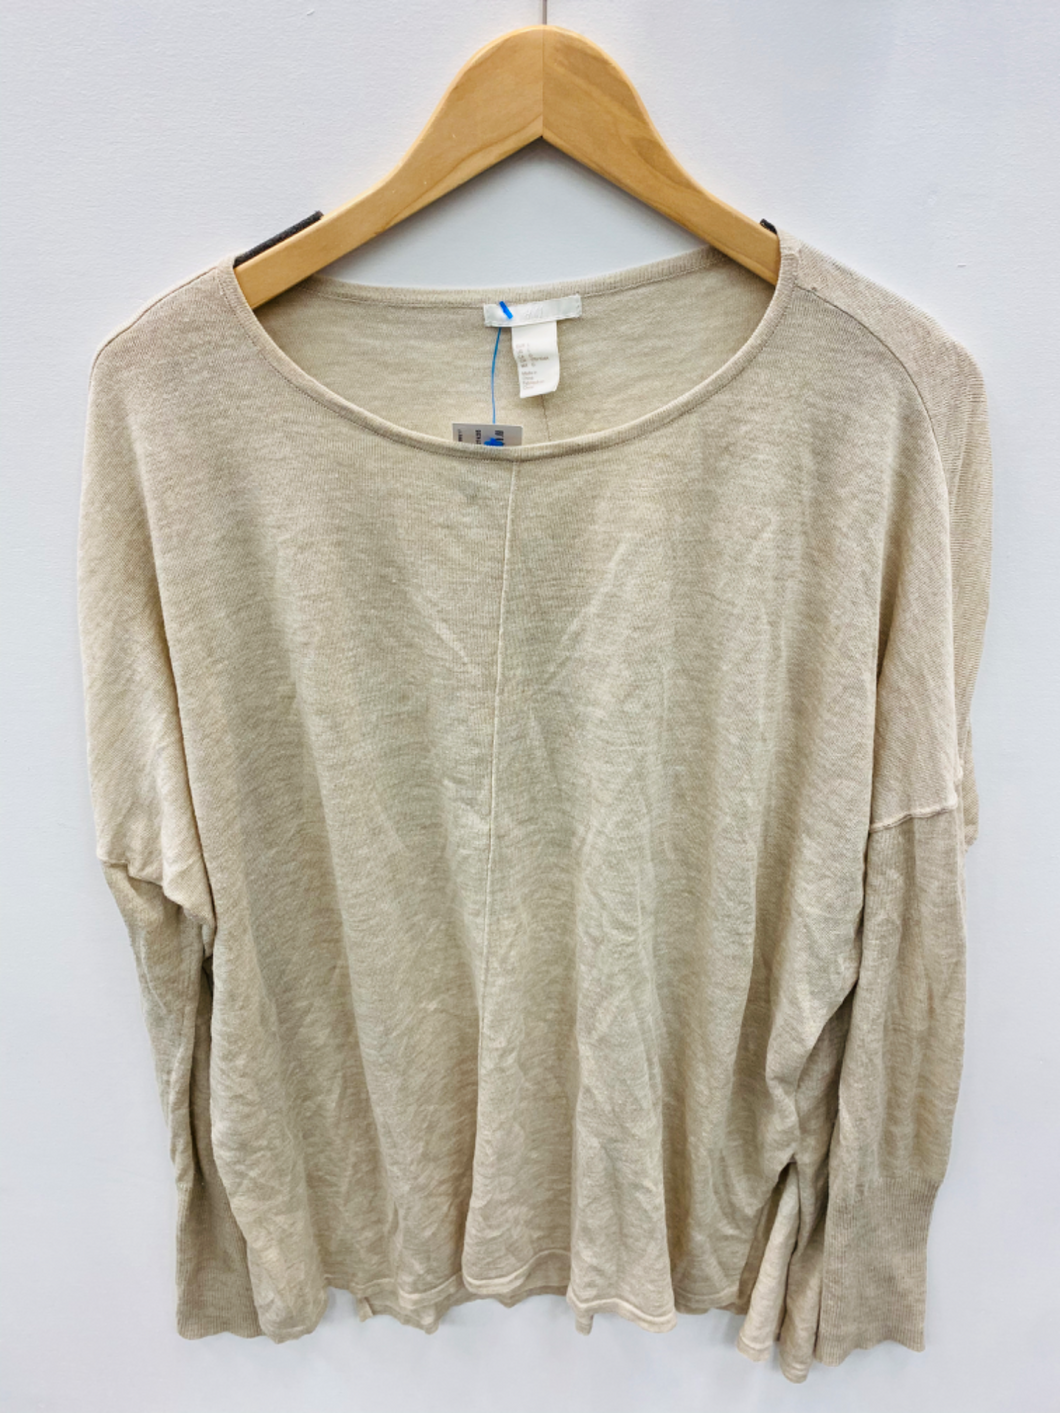 H & M Sweater Size Large